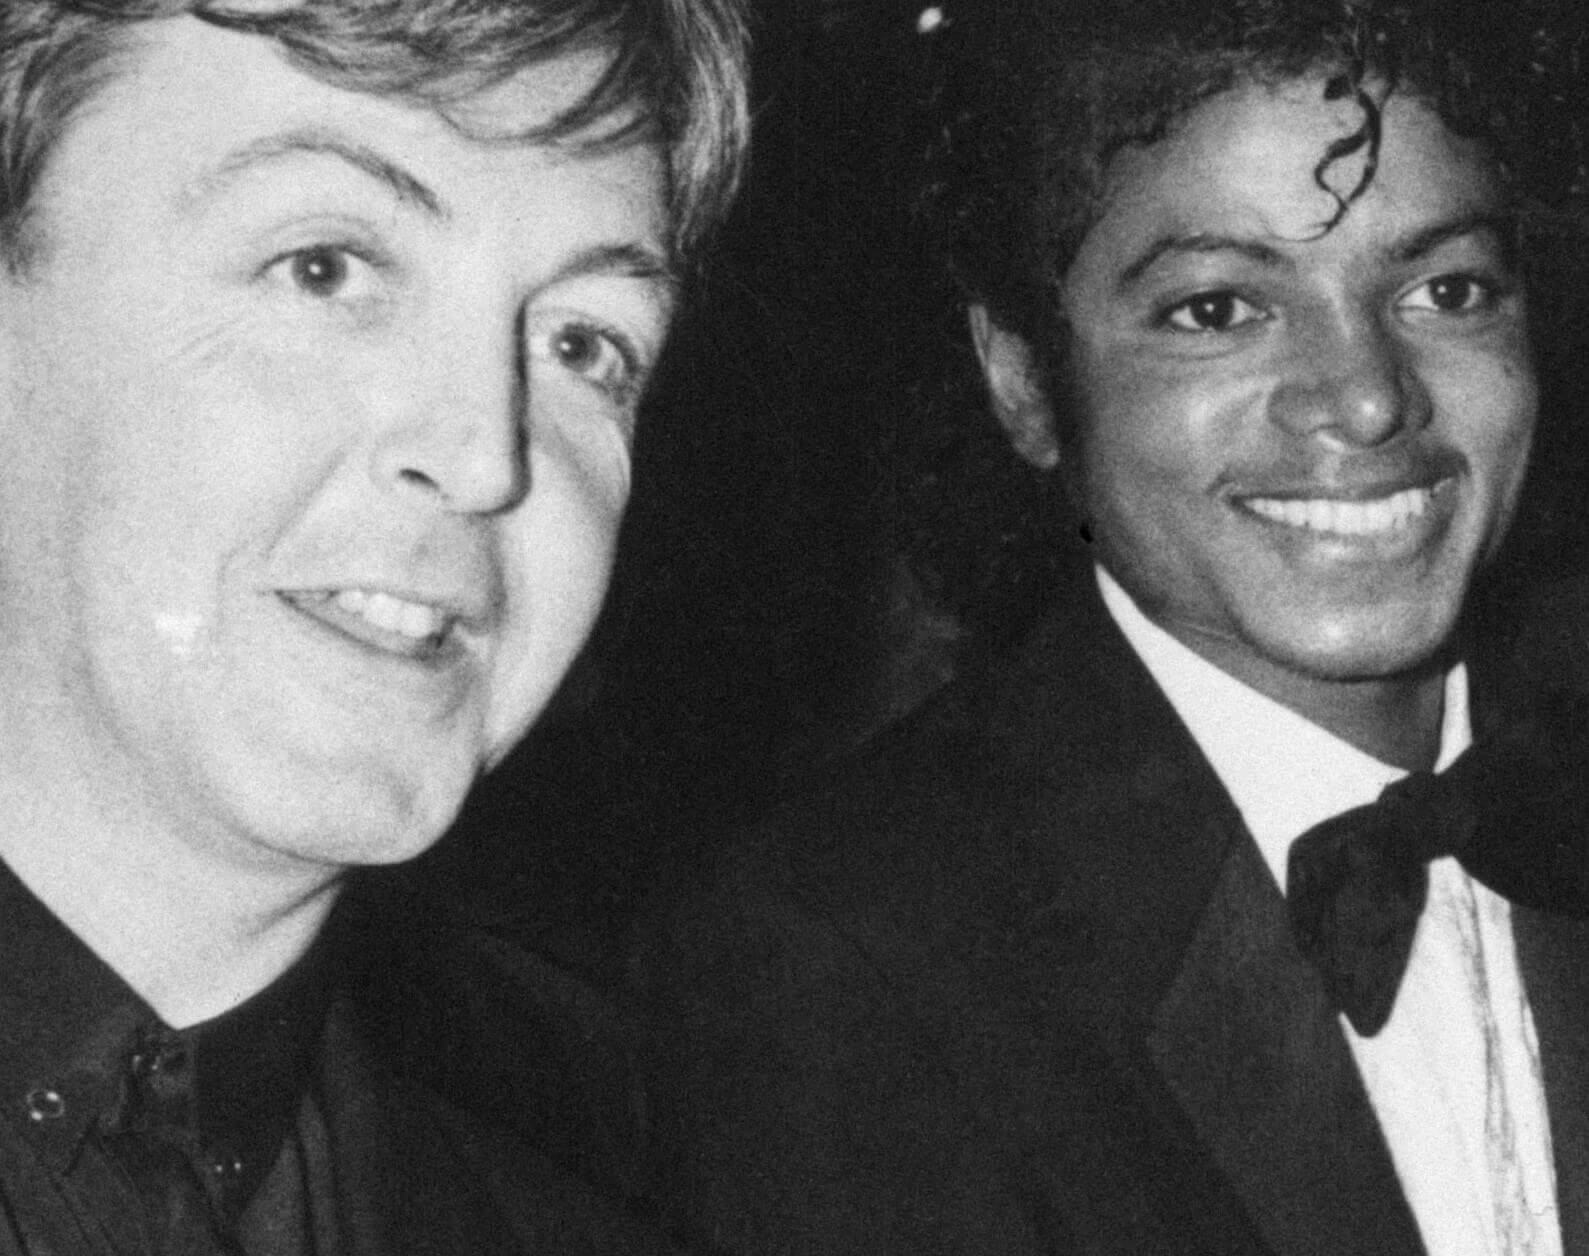 Paul McCartney and Michael Jackson in black-and-white